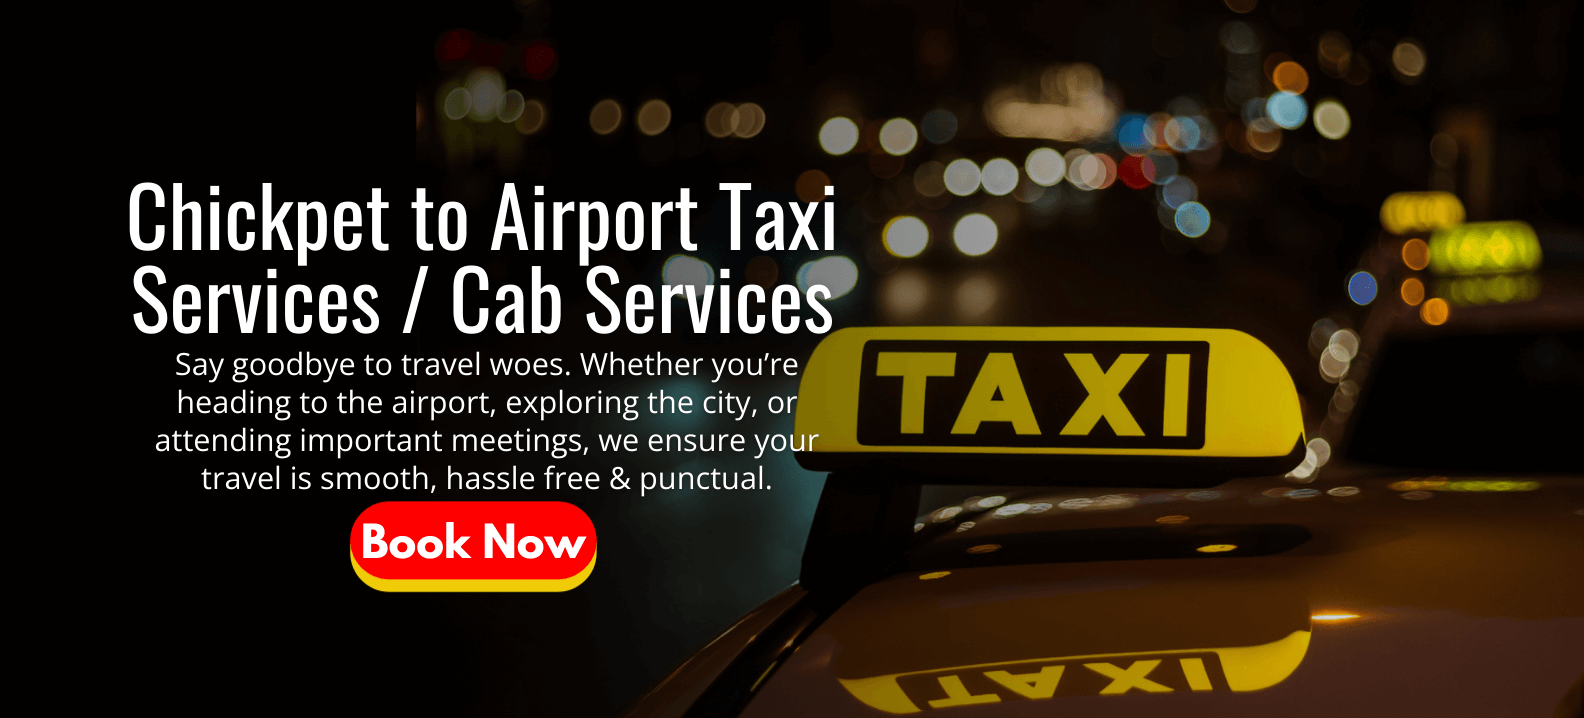 Chickpet to Airport Taxi Services _ Cab Services